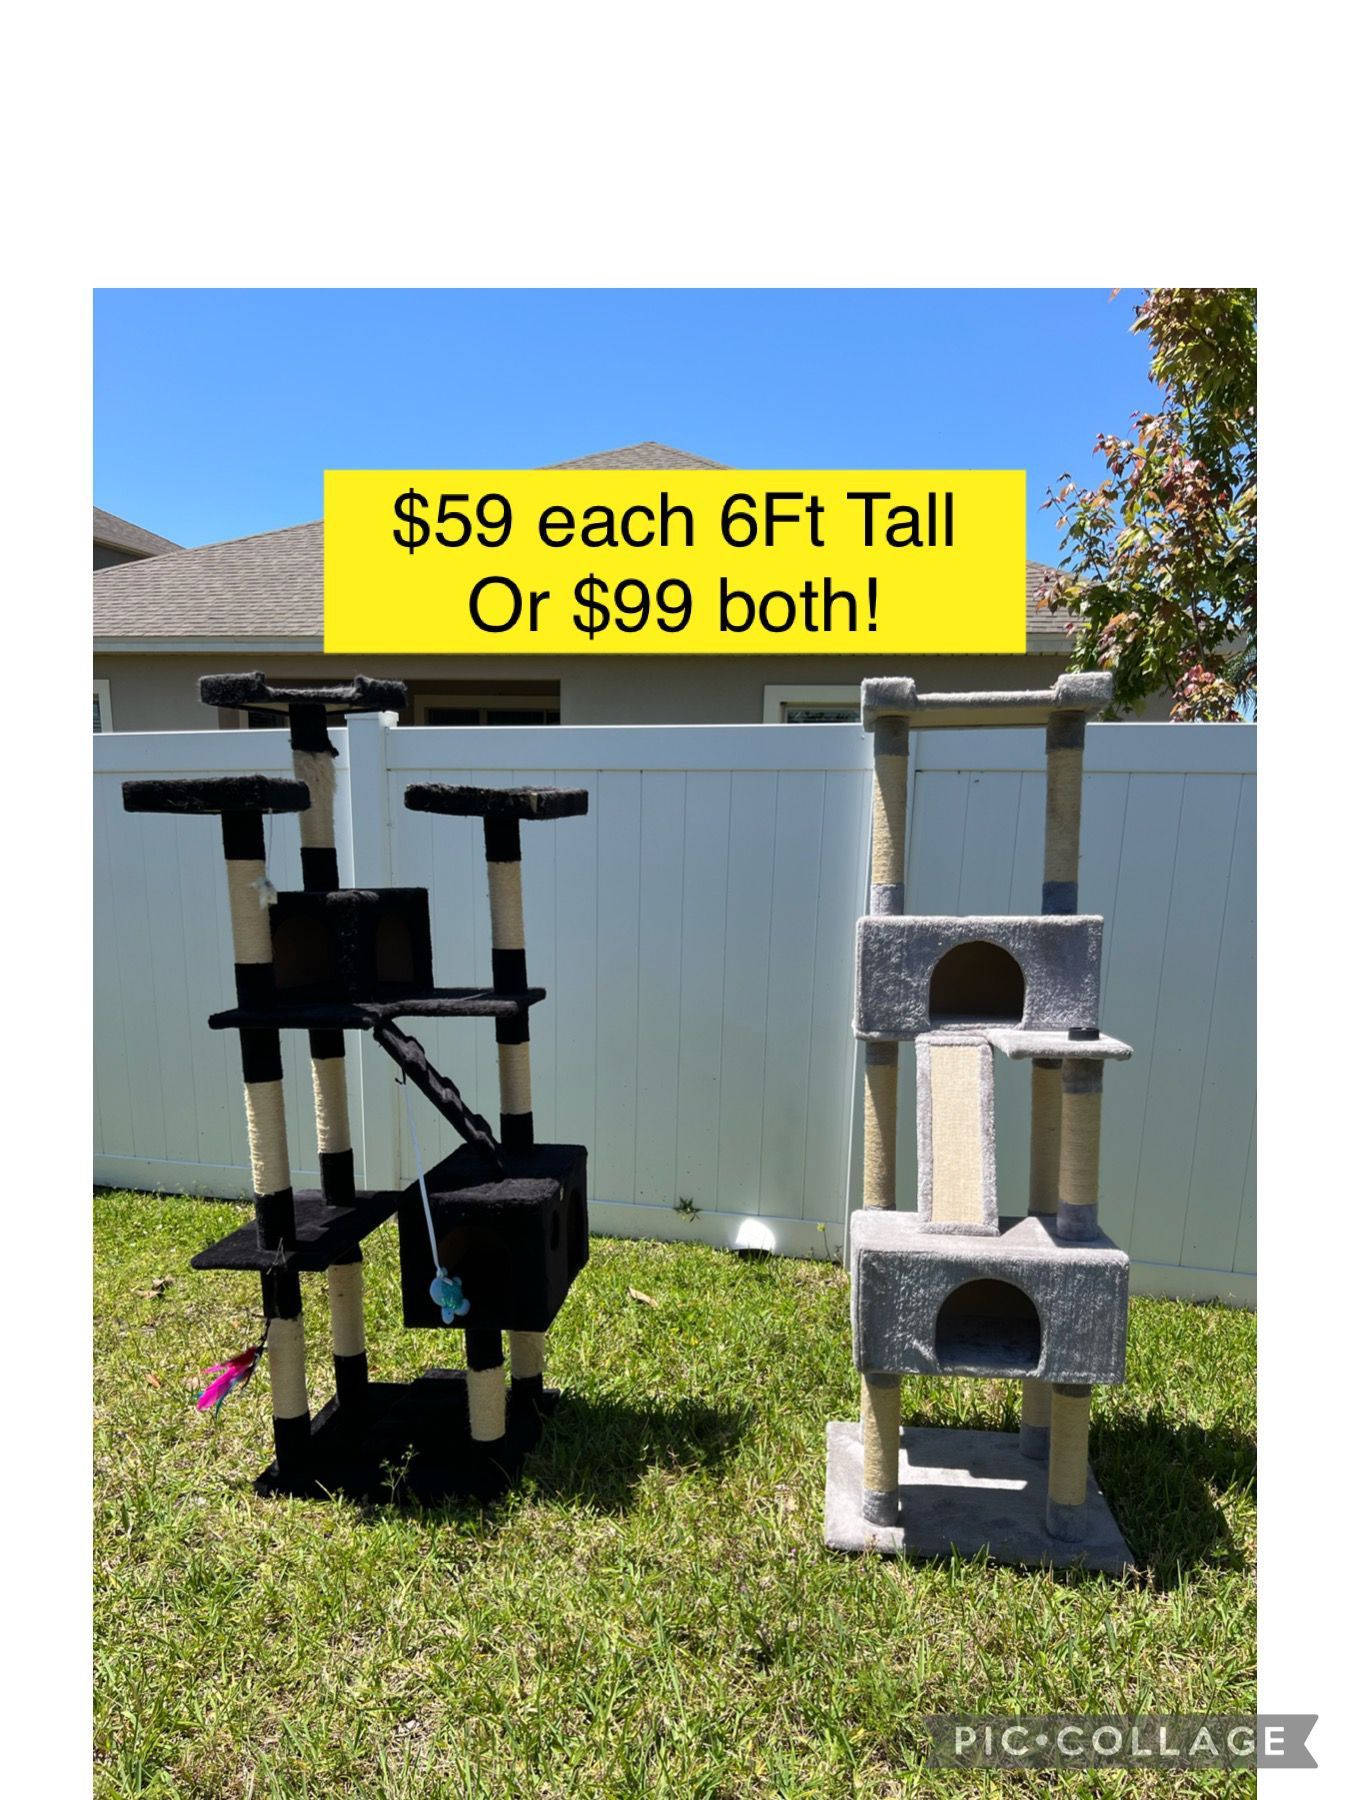 Cat tower, Gray & Black bScratching Post Cat Furniture - 6 FT Tall $59 each or $99 both / Torres gato